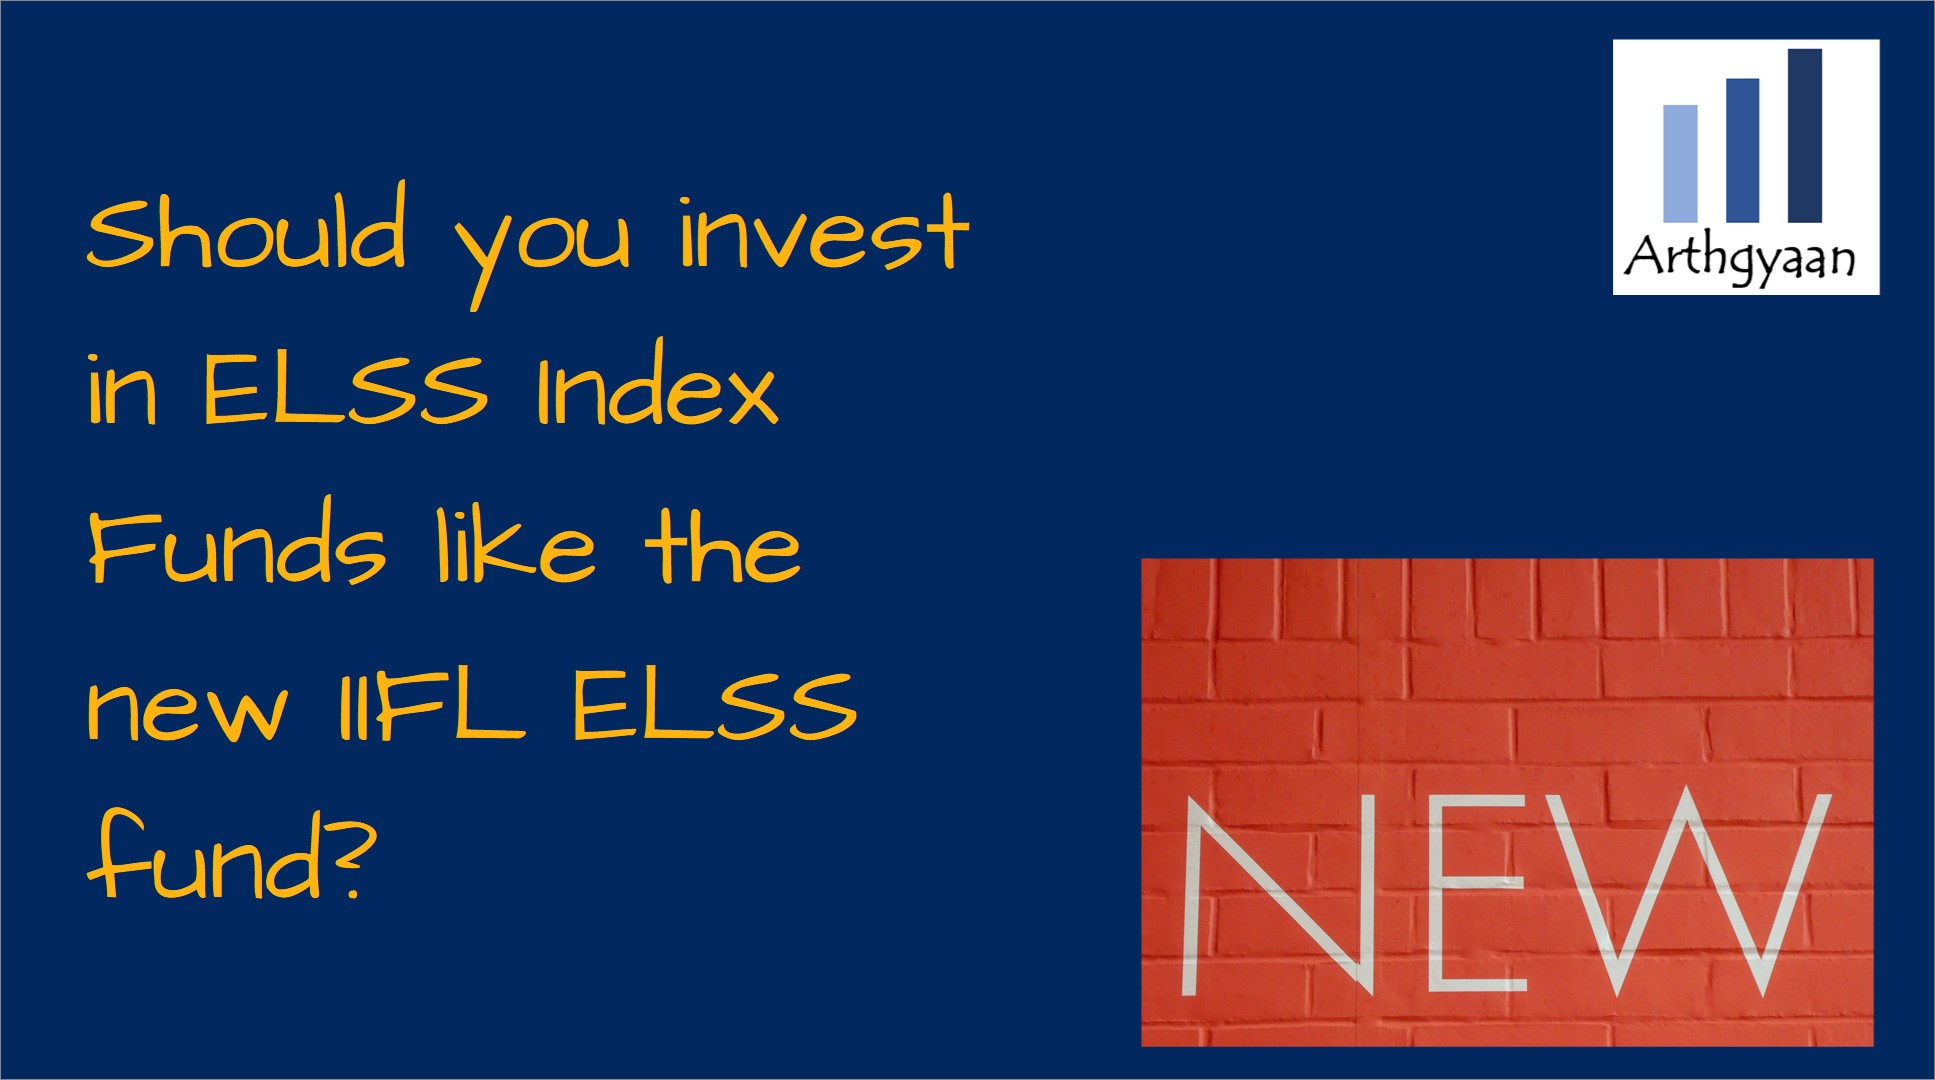 Should you invest in ELSS Index Funds like the new IIFL ELSS fund?